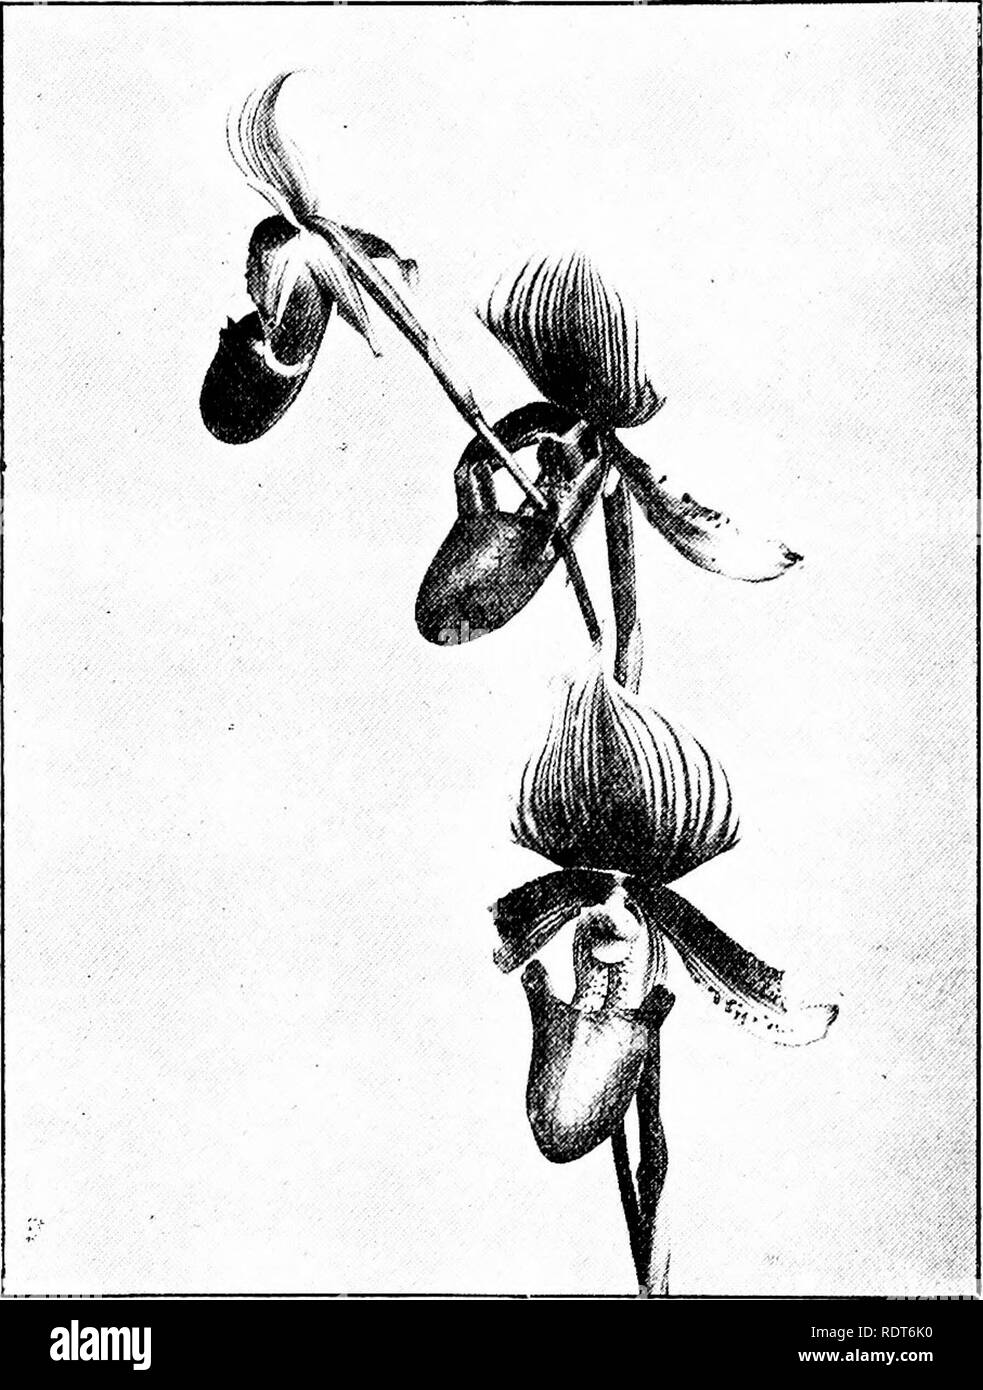 . The orchid stud-book: an enumeration of hybrid orchids of artificial origin, with their parents, raisers, date of first flowering, references to descriptions and figures, and synonymy. With an historical introduction and 120 figures and a chapter on hybridising and raising orchids from seed. Orchids. 150 THE ORCHID STUD-BOOK. [Part II. C. X Cymatodes, R. 11. Mens. Cyp. 1893, ed. 2,29; G.C, ii. 684 (unnamed). — R. H. Measures. C. x beechense, G.C. 1894, i. 762; 0.2?, 1894, 223.—Y. R. Lee. 161. P. X Cythera (purpuratum x Spicerianum ? ),Kerch. Liv. d. 0. 478.— R. H. Measures, 1890. C. x Cythe Stock Photo